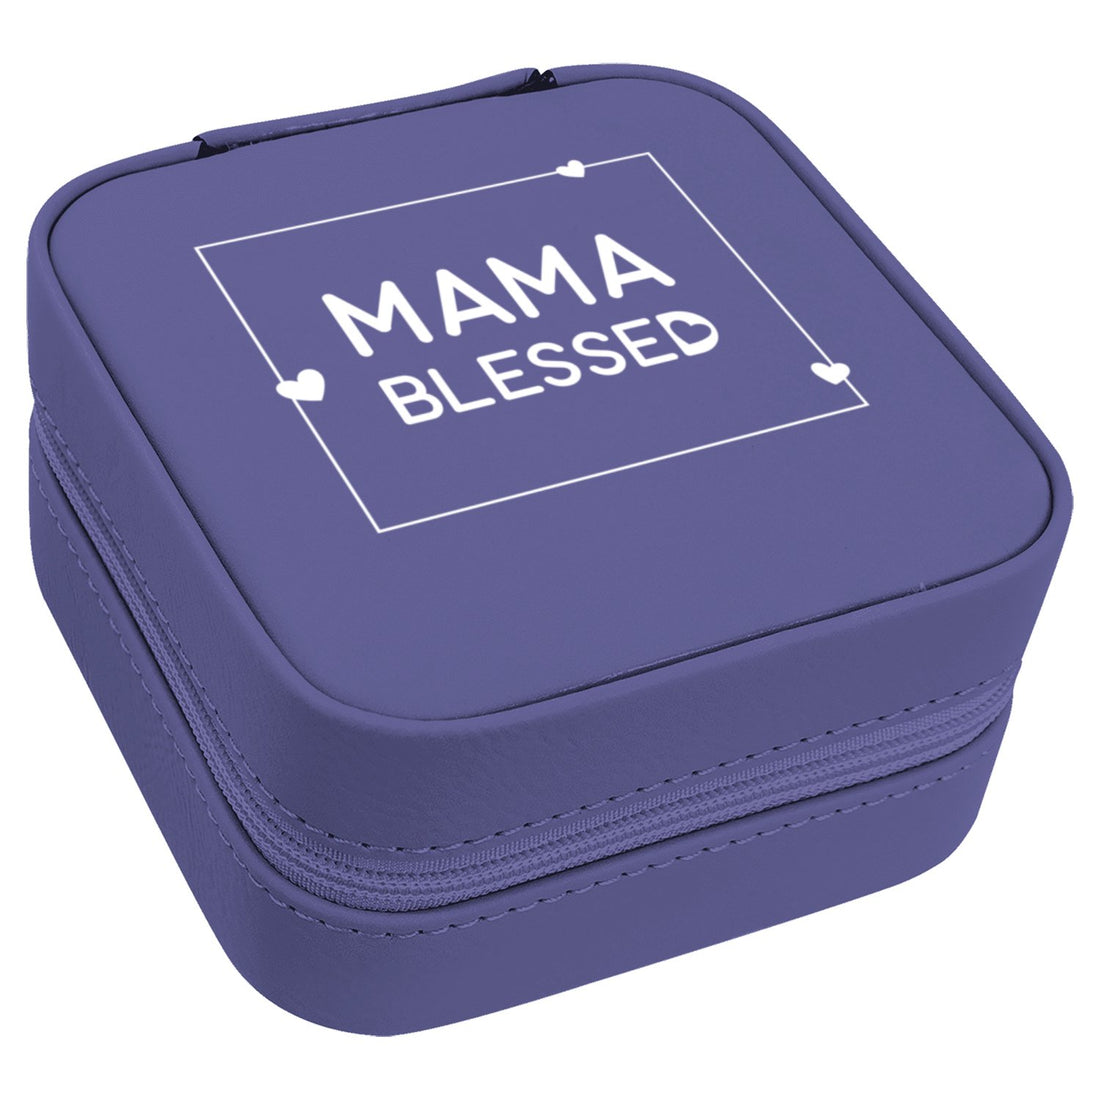 Blessed Mom Jewelry Organizer - Positively Sassy - Blessed Mom Jewelry Organizer